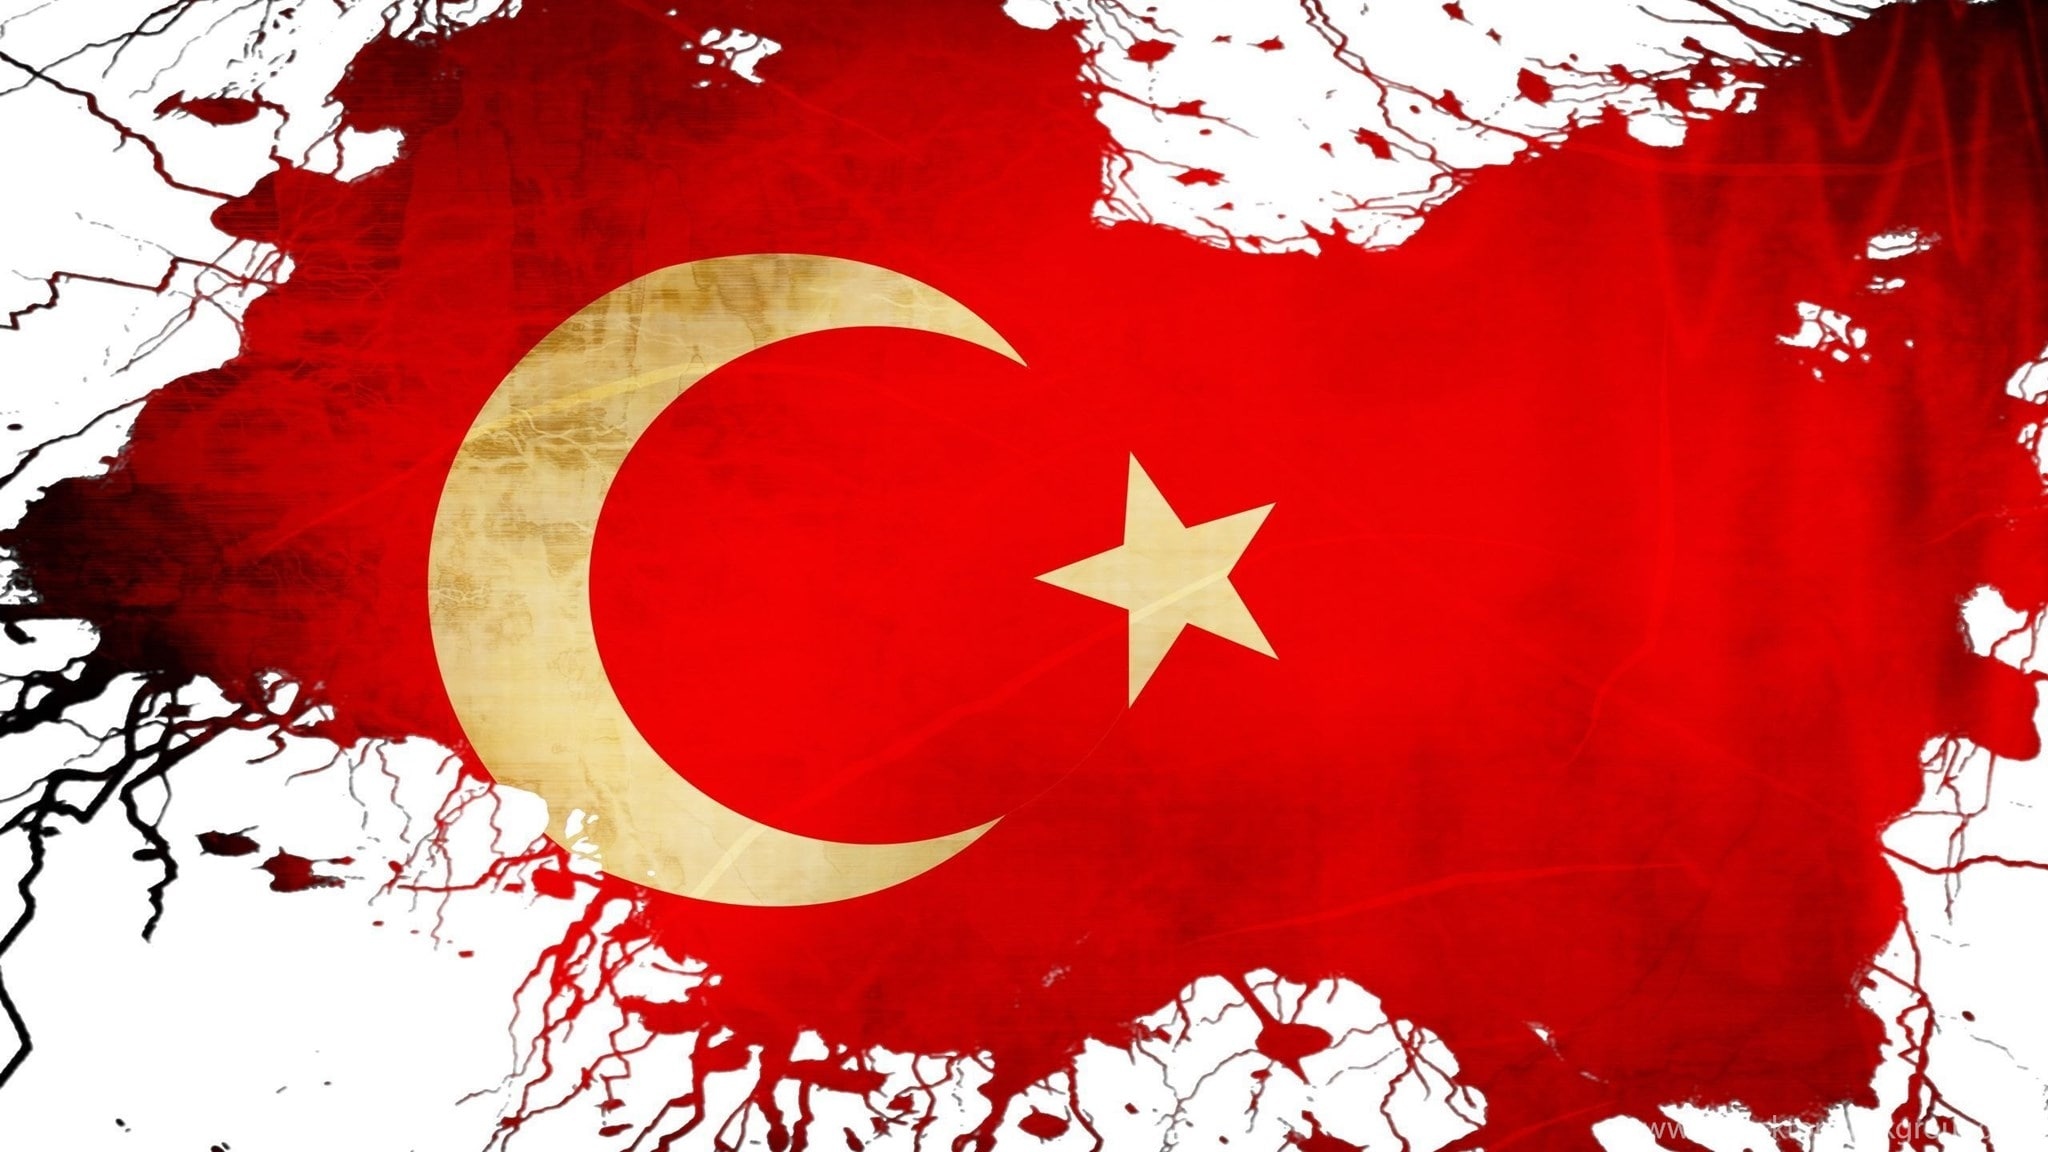 Turkish Lira Collapse: Can It Be Solved?